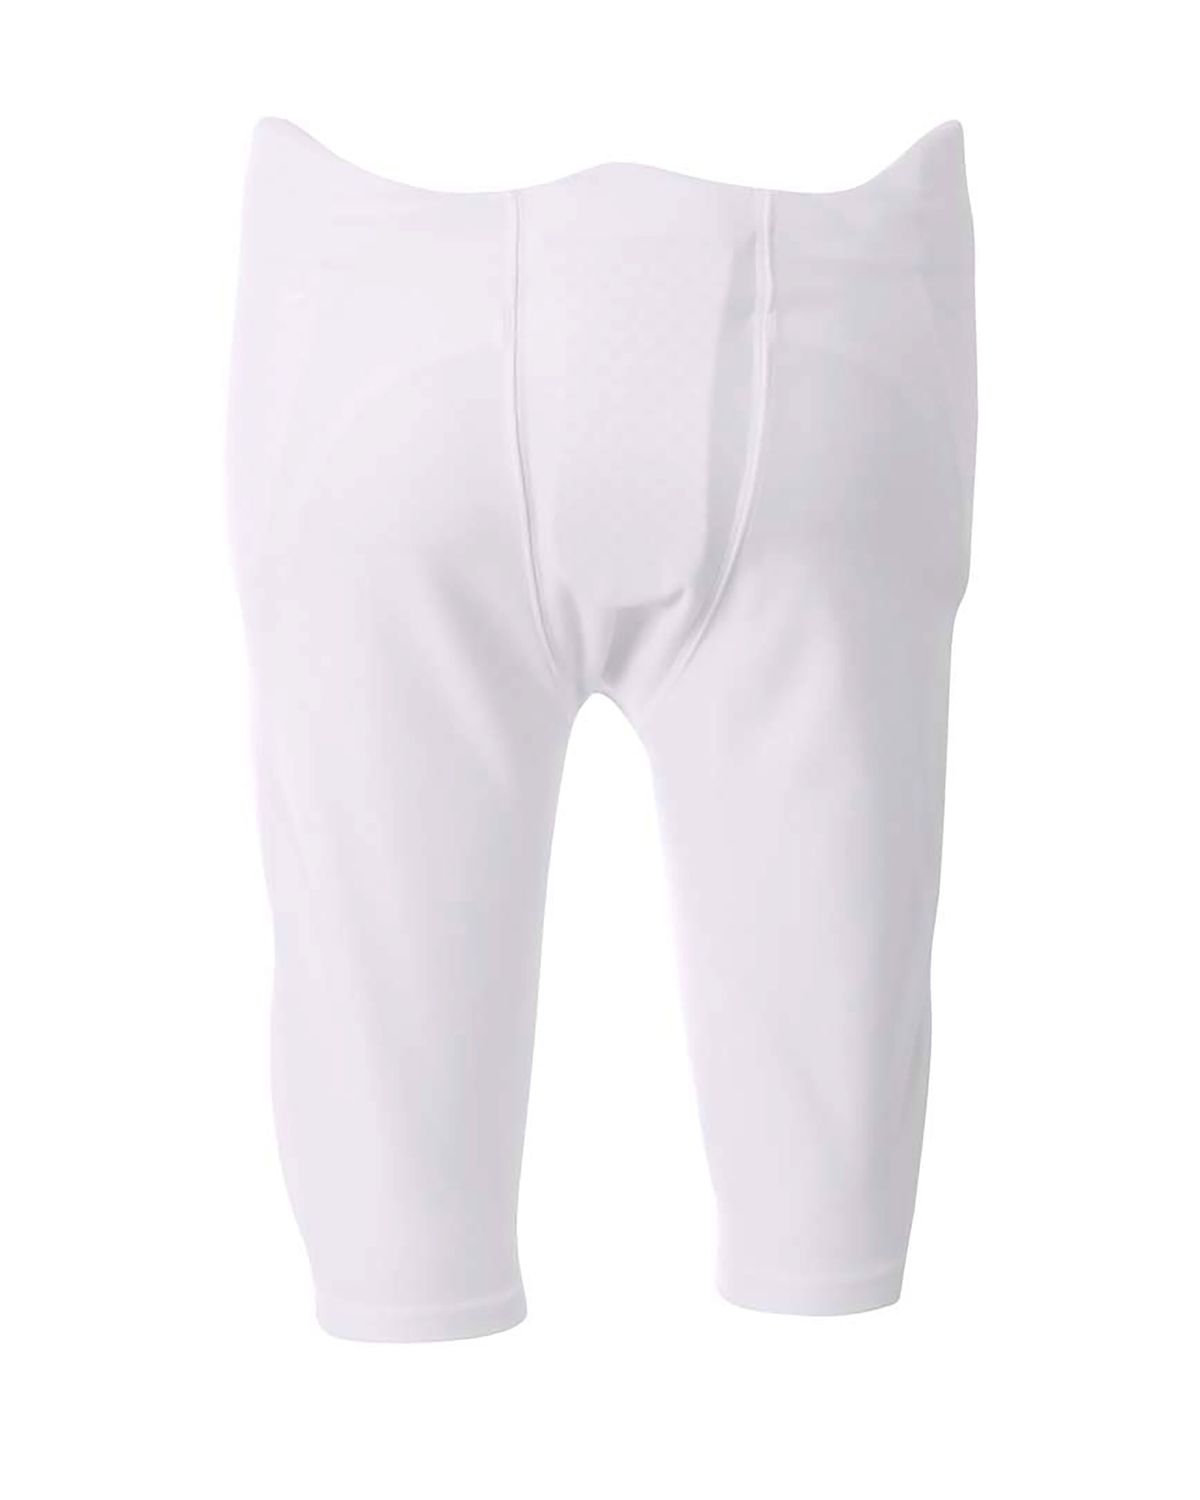 'A4 NB6180 Youth Flyless Integrated Football Pants'